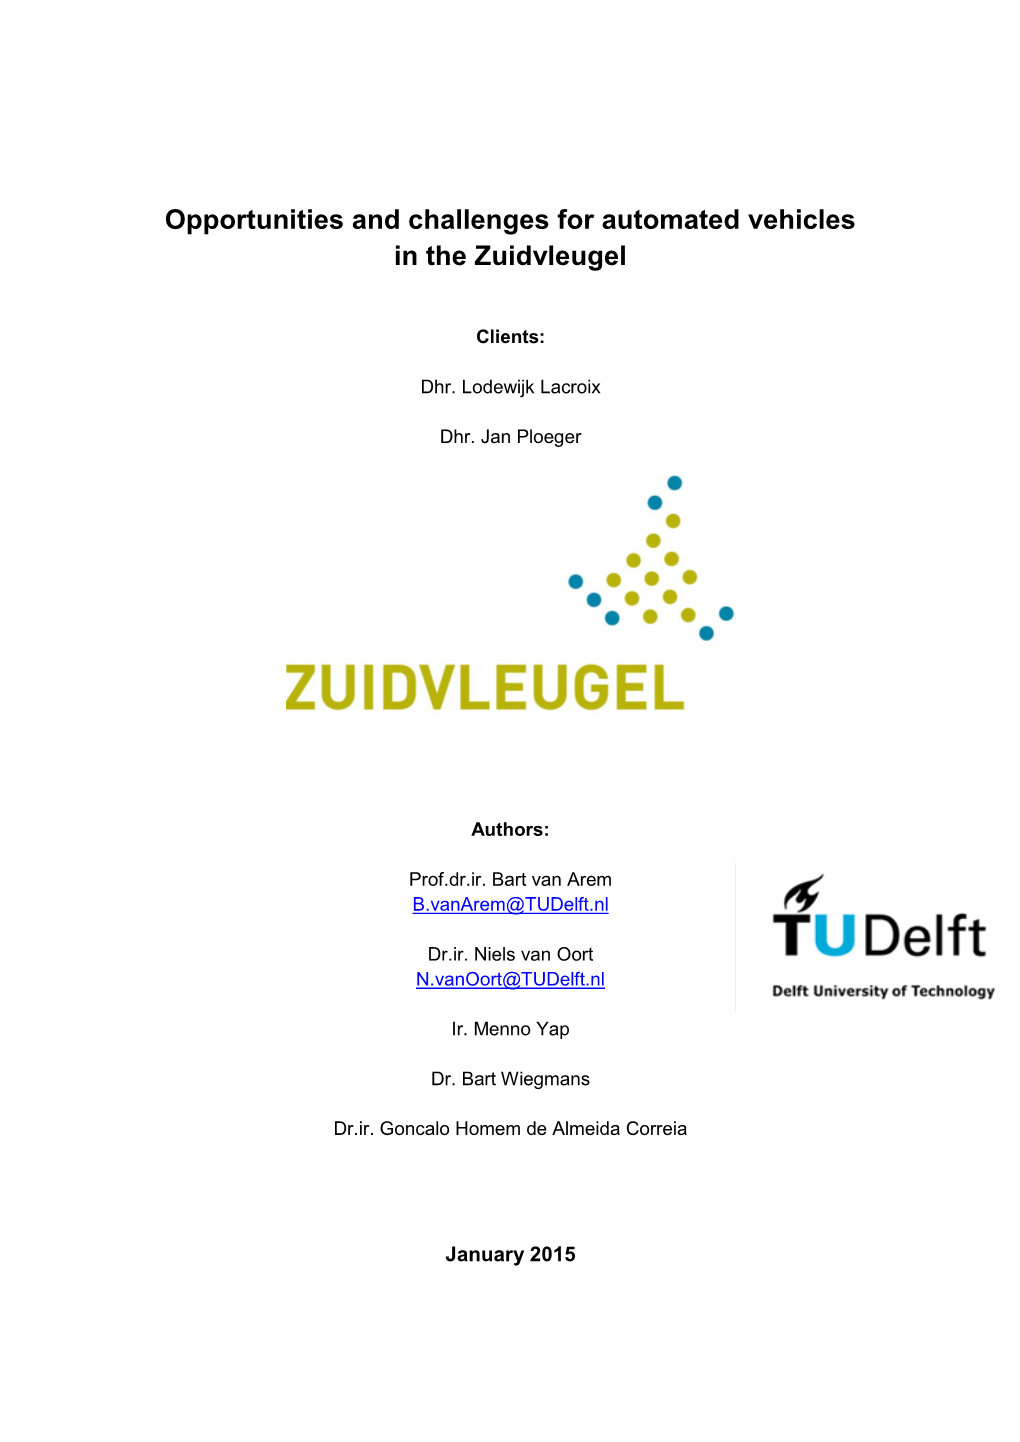 Opportunities and Challenges for Automated Vehicles in the Zuidvleugel